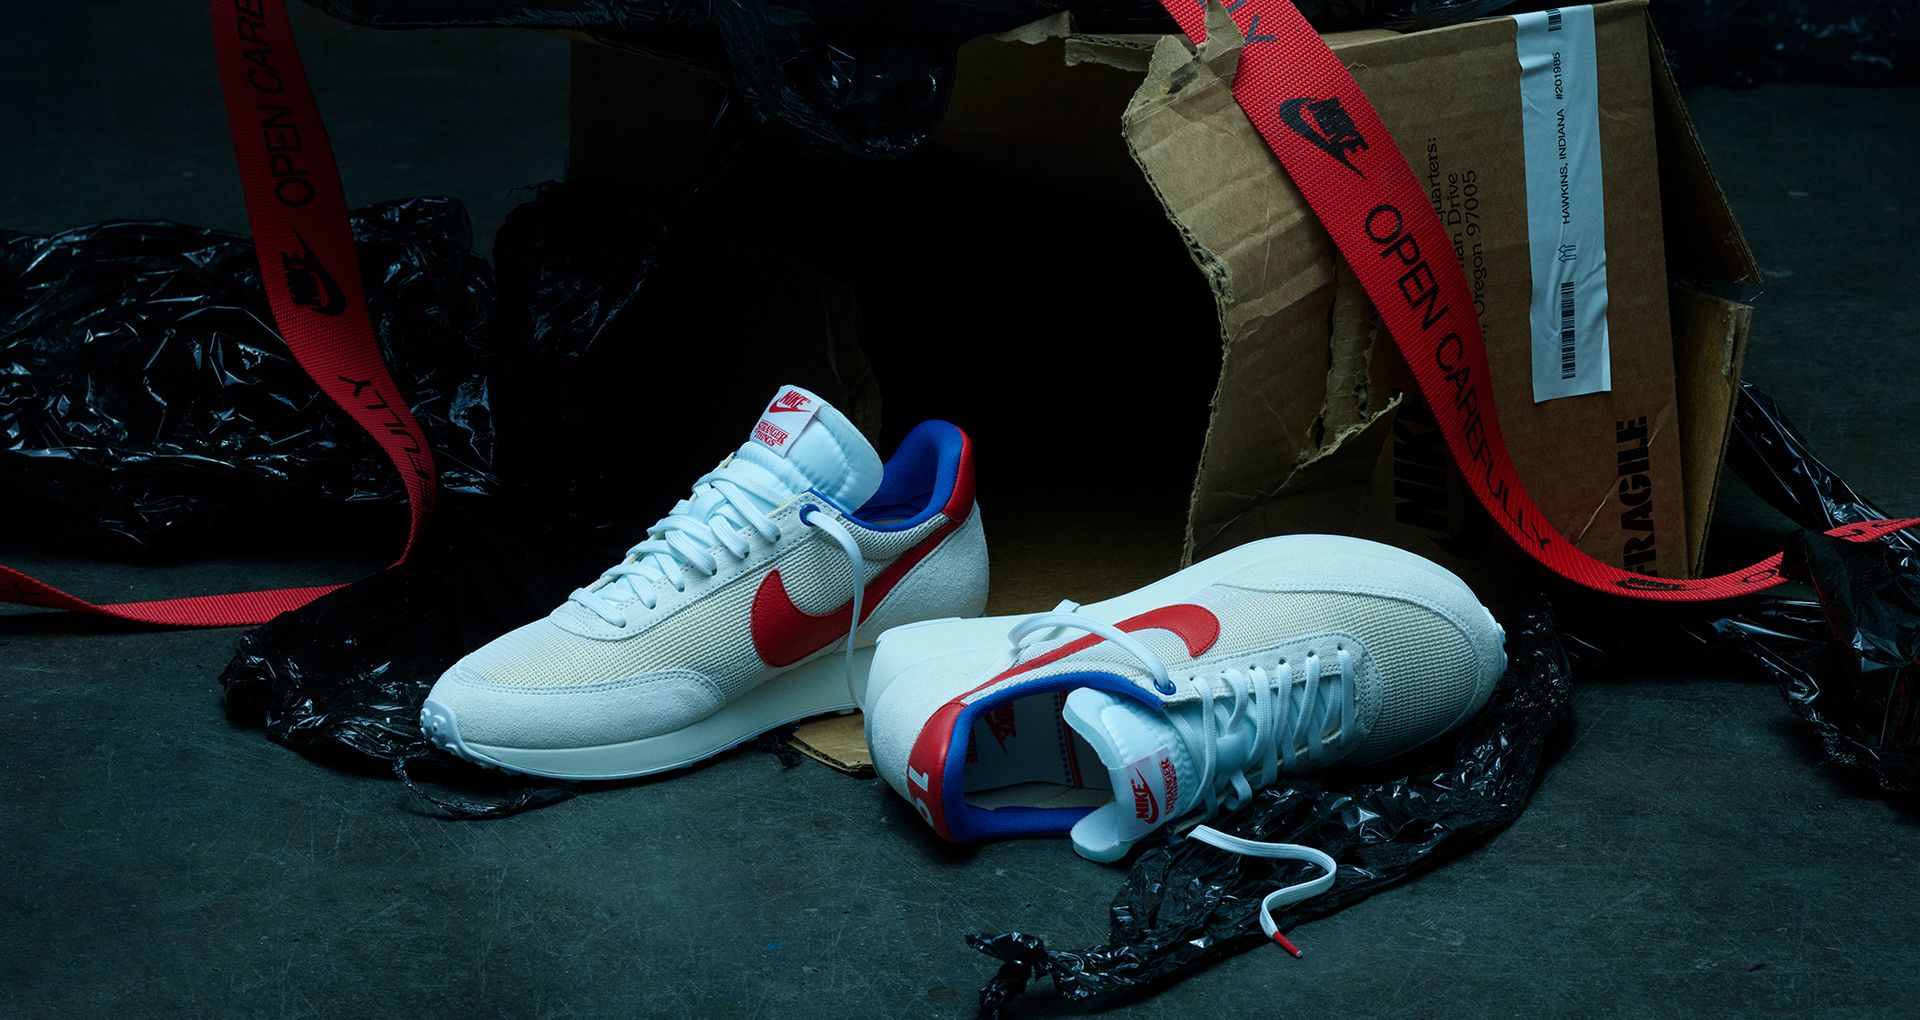 Nike Stranger Things Collection | The 